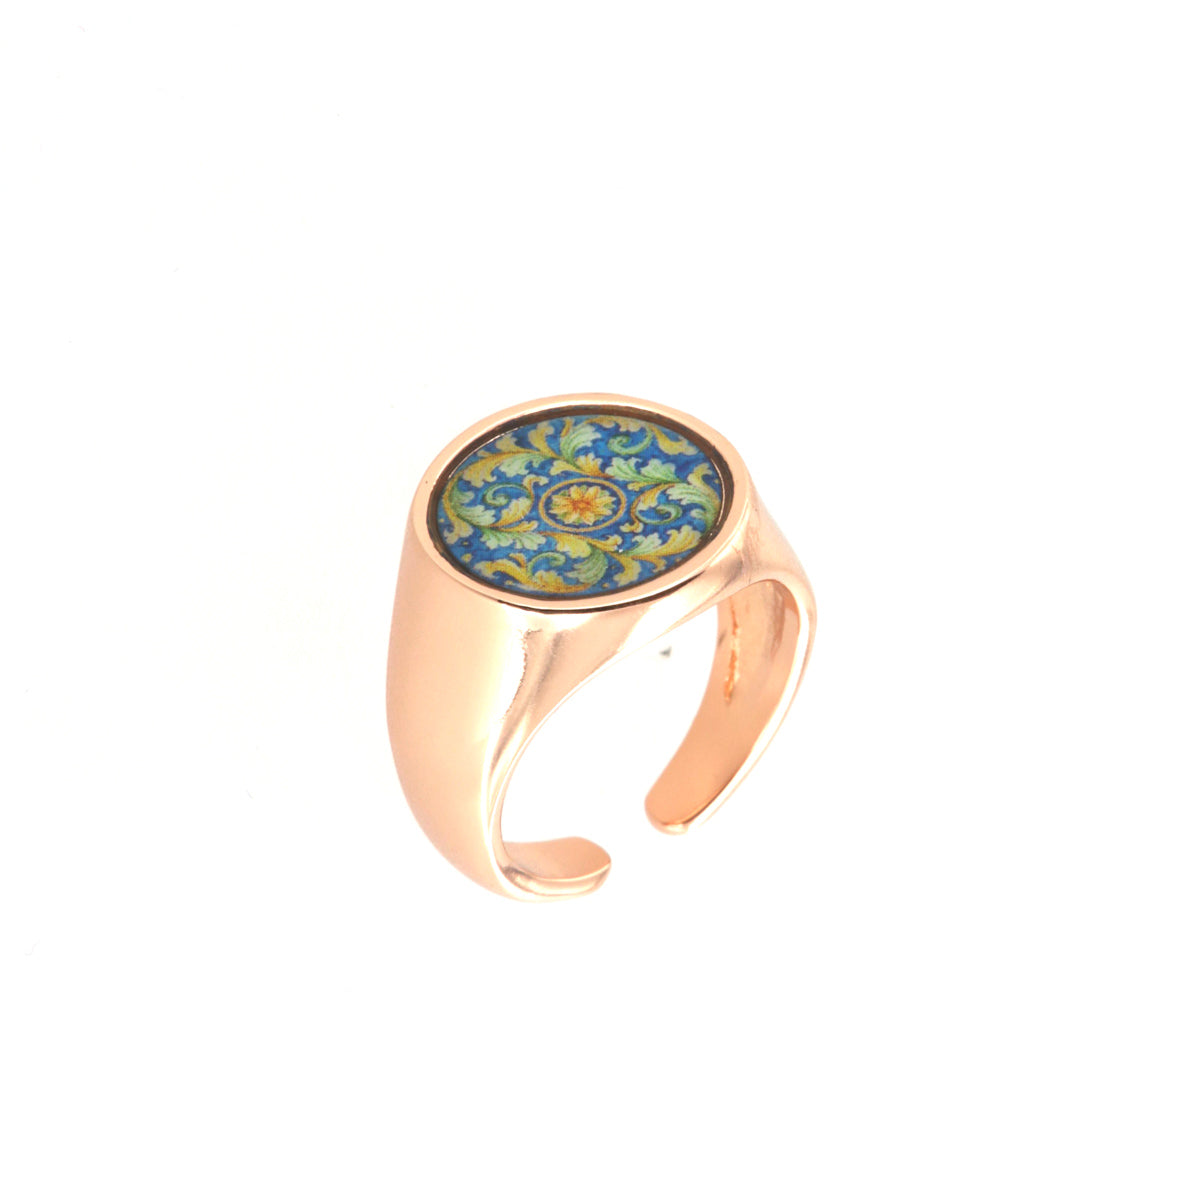 Sigillo metal ring, with colored majolica design inspired by the island of Sicily